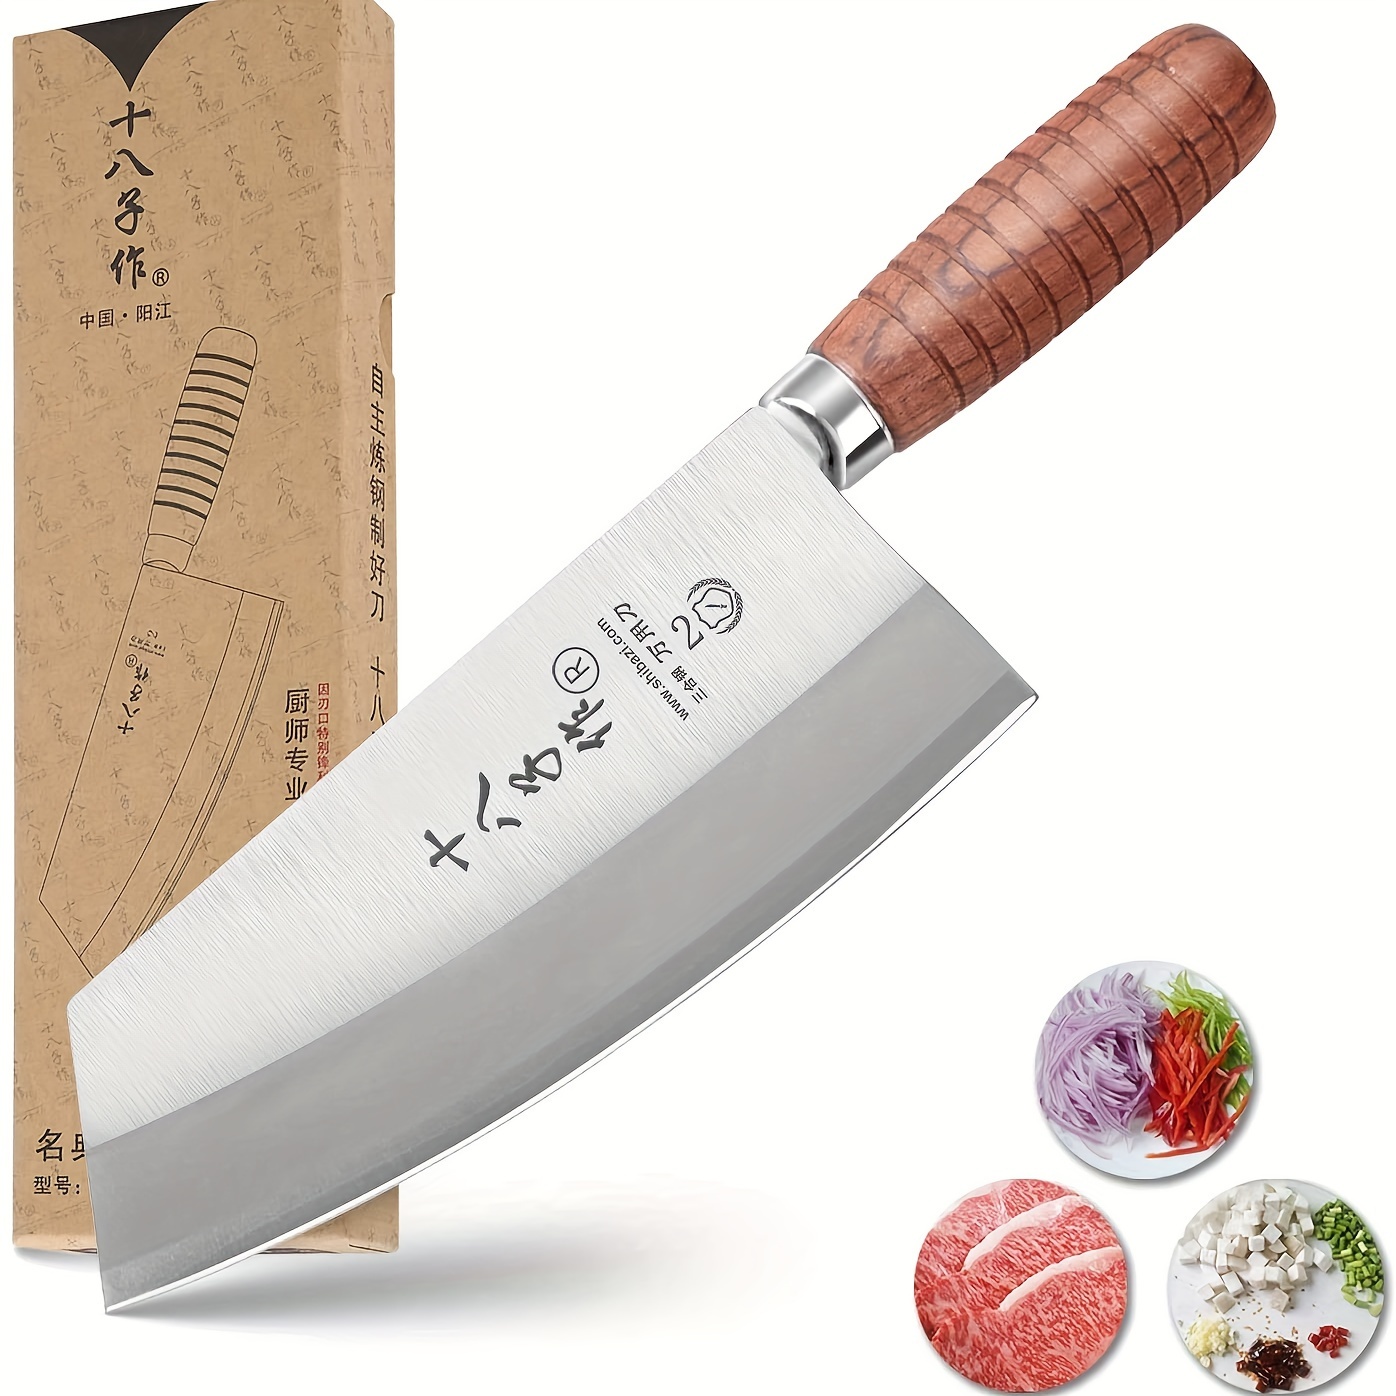 

Shi Ba Zi Zuo Chef Knife Chinese Vegetable Cleaver For Kitchen 7-inch Stainless Steel Kitchen Knife With Ergonomic Design Comfortable Wooden Handle